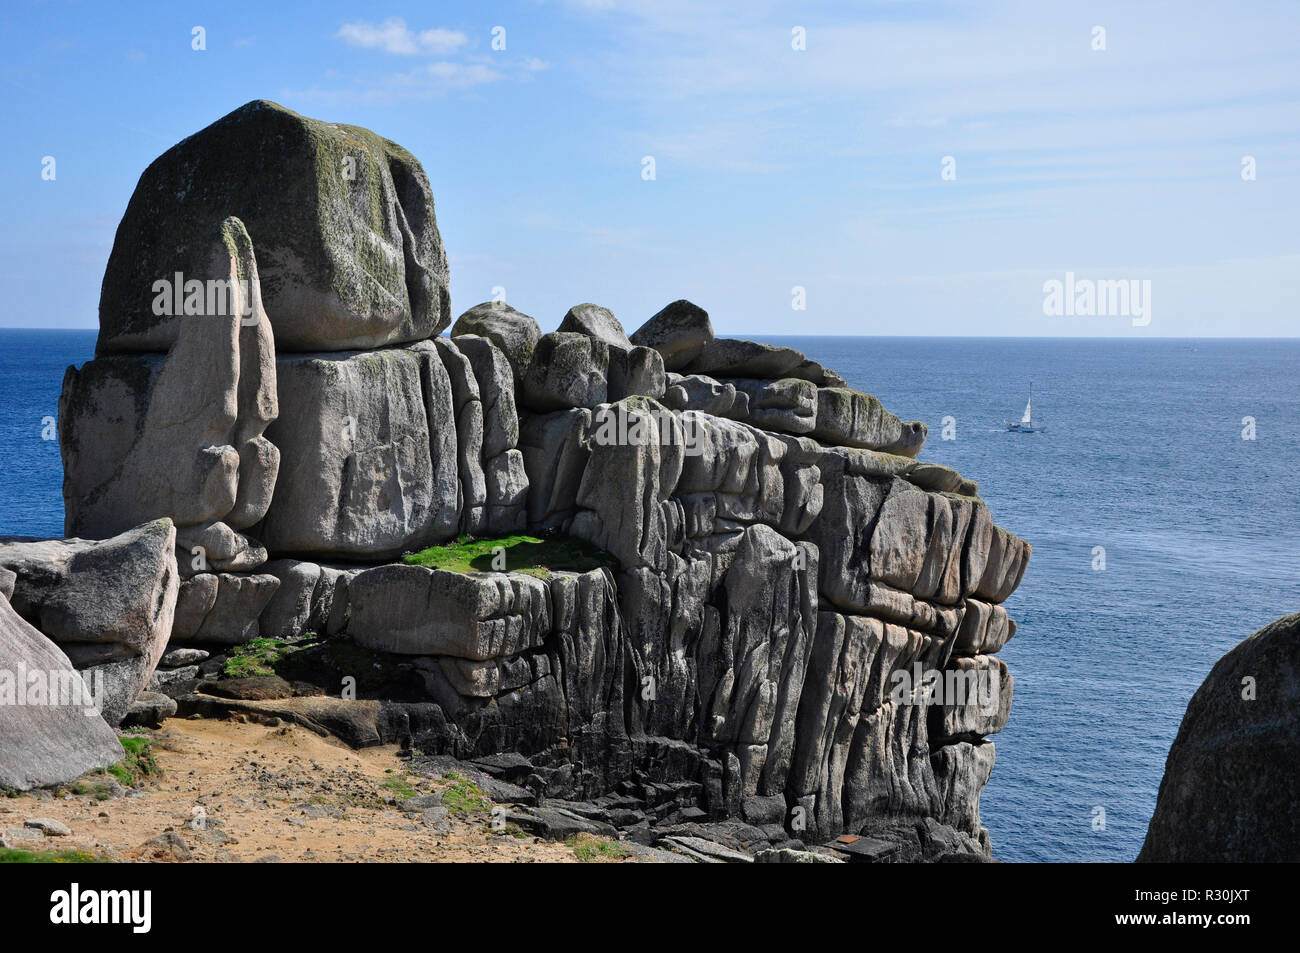 Wind,rain and sea erored rocks,Granite, Tooth rock, Penninis Head, St Mary's, Isles of Scilly.UK. Stock Photo